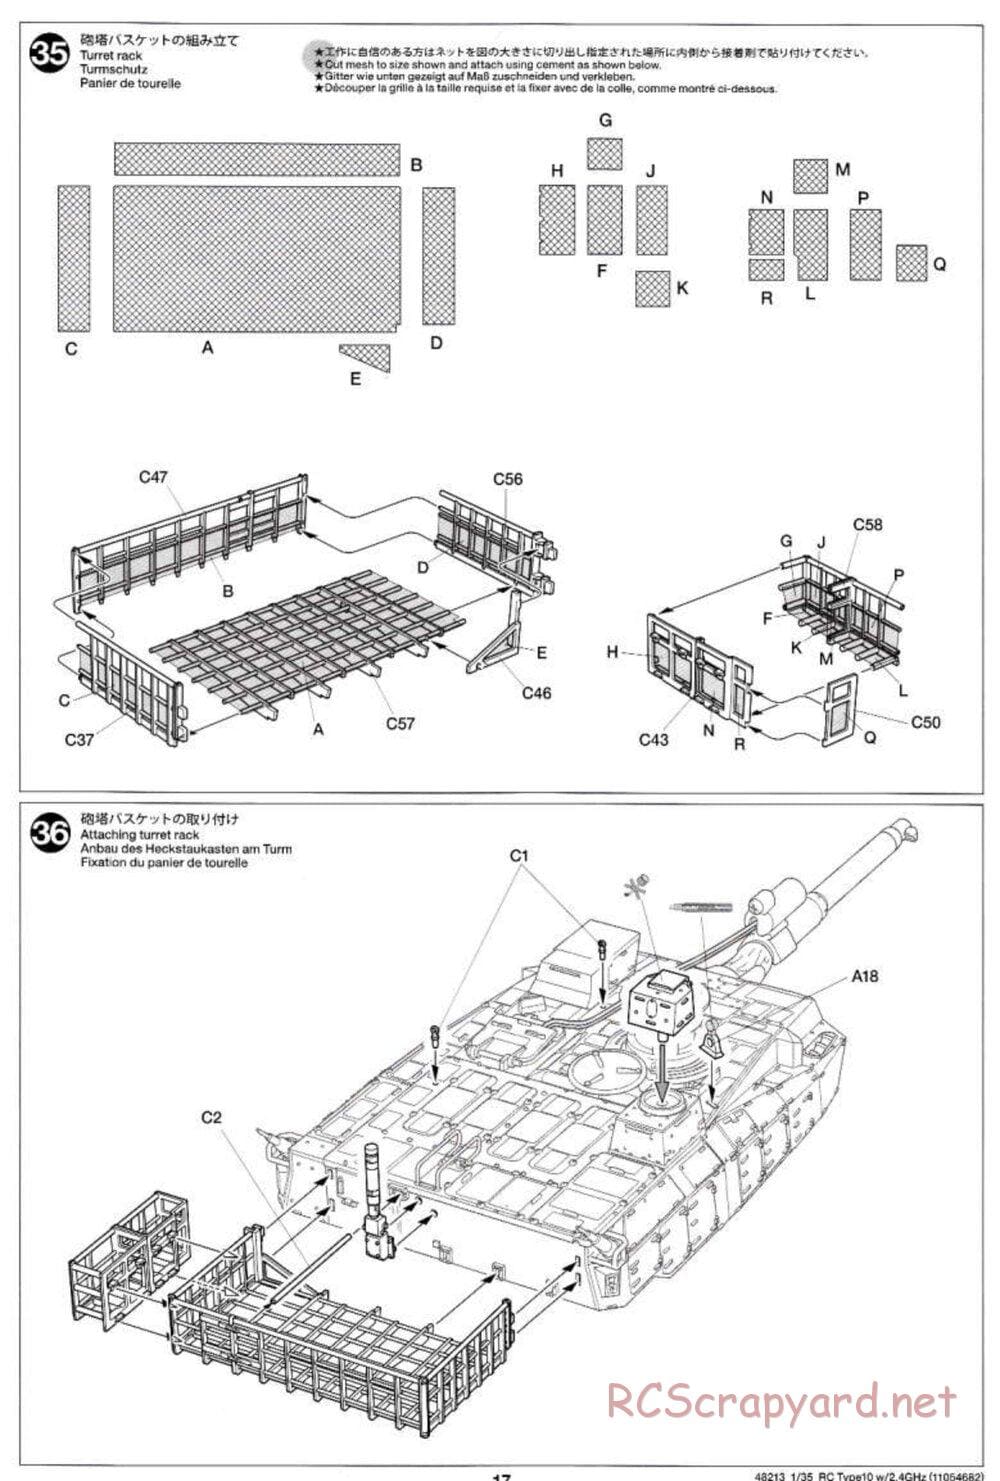 Tamiya - JGSDF Type 10 Tank - 1/35 Scale Chassis - Manual - Page 17